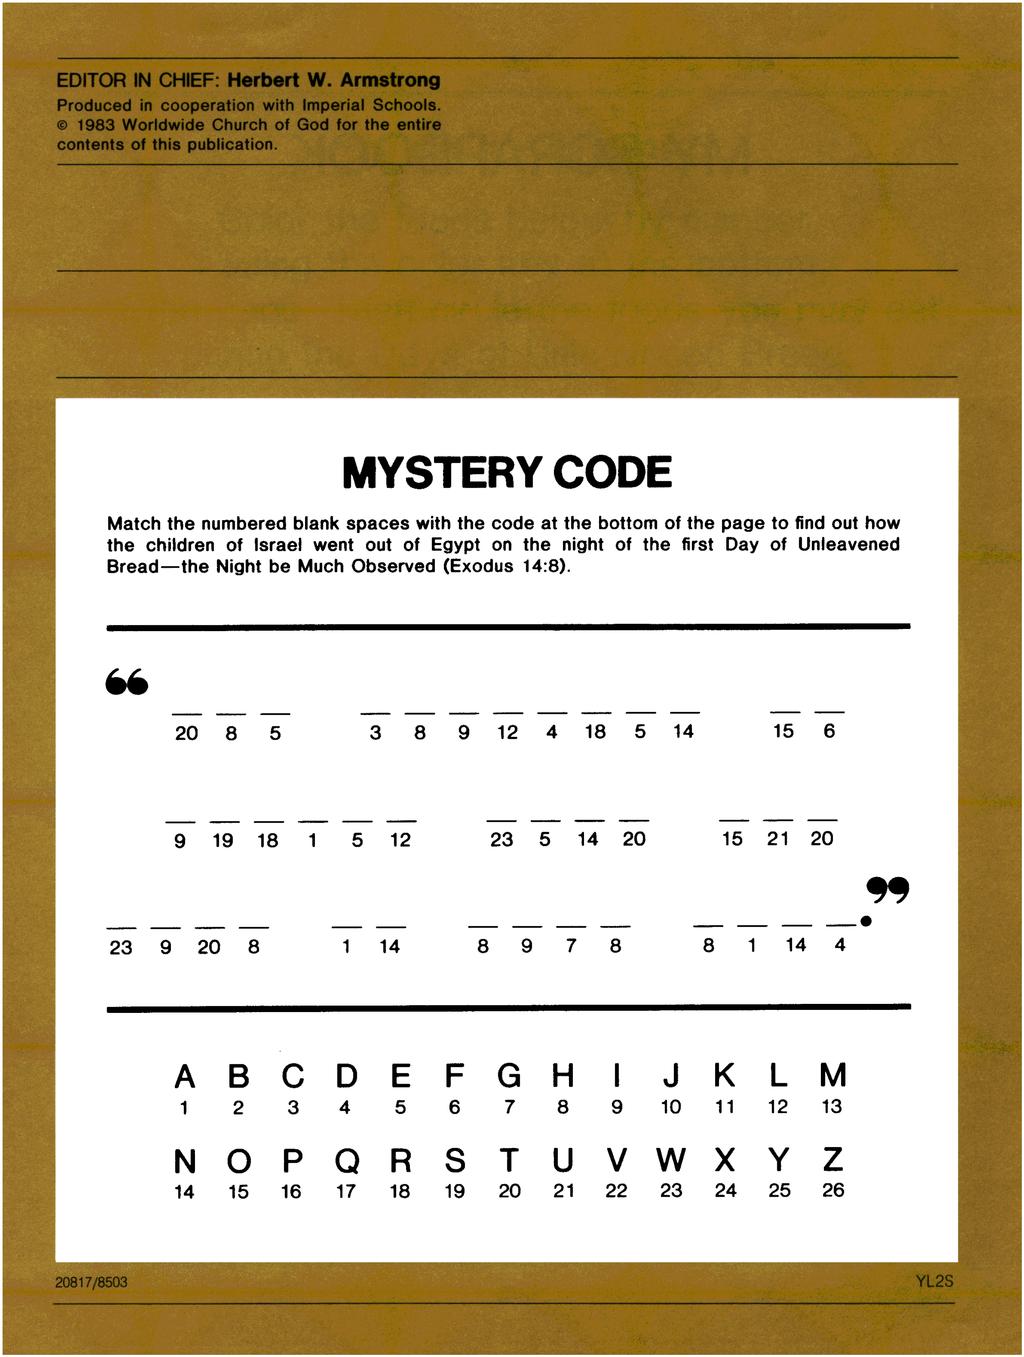 MYSTERY CODE Match the numbered blank spaces with the code at the bottom of the page to find out how the children of Israel went out of Egypt on the night of the first Day of Unleavened Bread-the